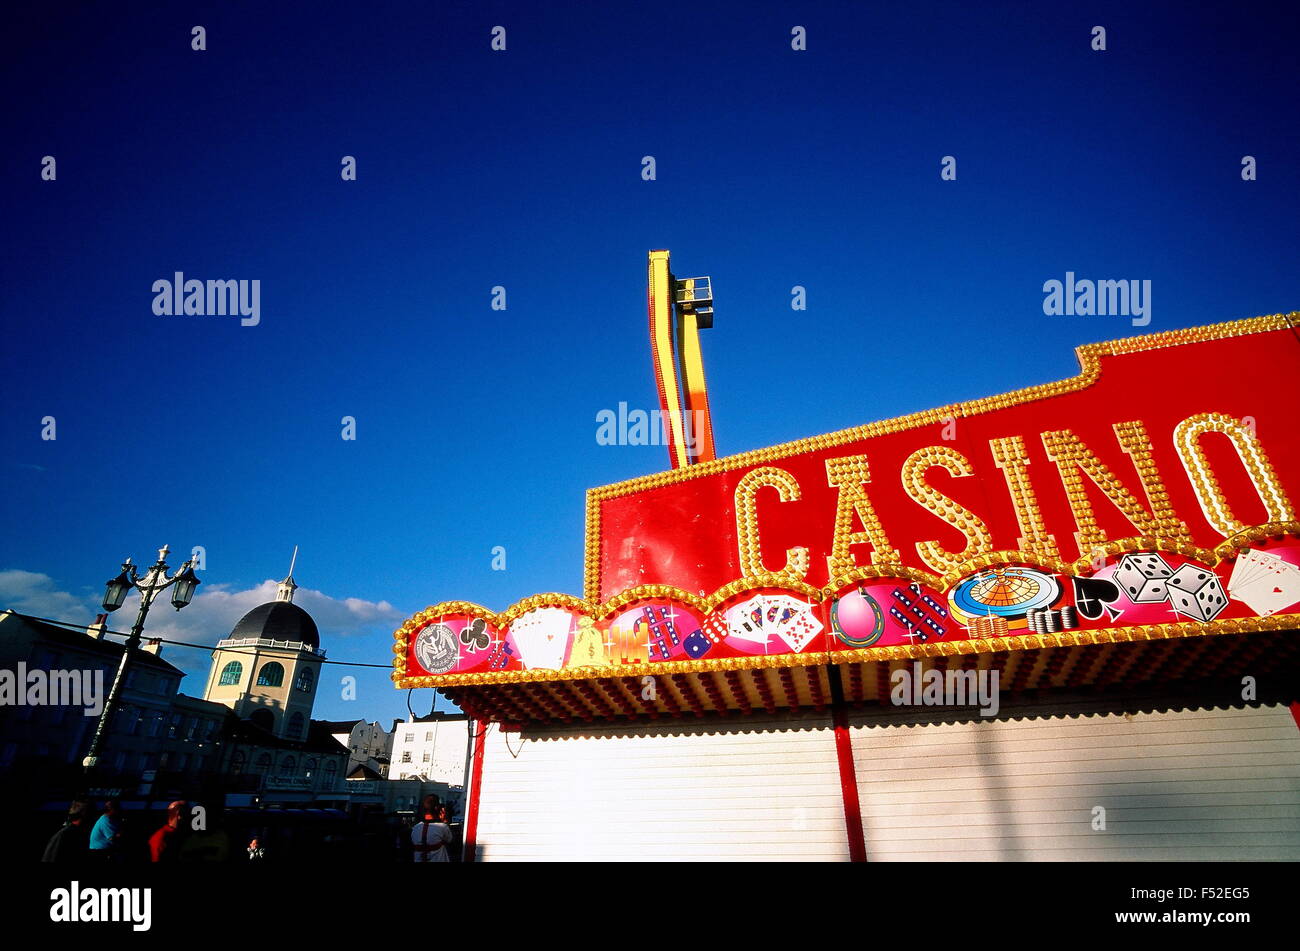 AJAXNETPHOTO. WORTHING, ENGLAND. - SEAFRONT CASINO - AMUSEMENT STALL SET UP ON THE SEA-FRONT PROMENADE; THE WELL KNOWN DOME CINEMA CAN BE SEEN CENTRE LEFT. PHOTO:JONATHAN EASTLAND/AJAX REF:71108 3 Stock Photo